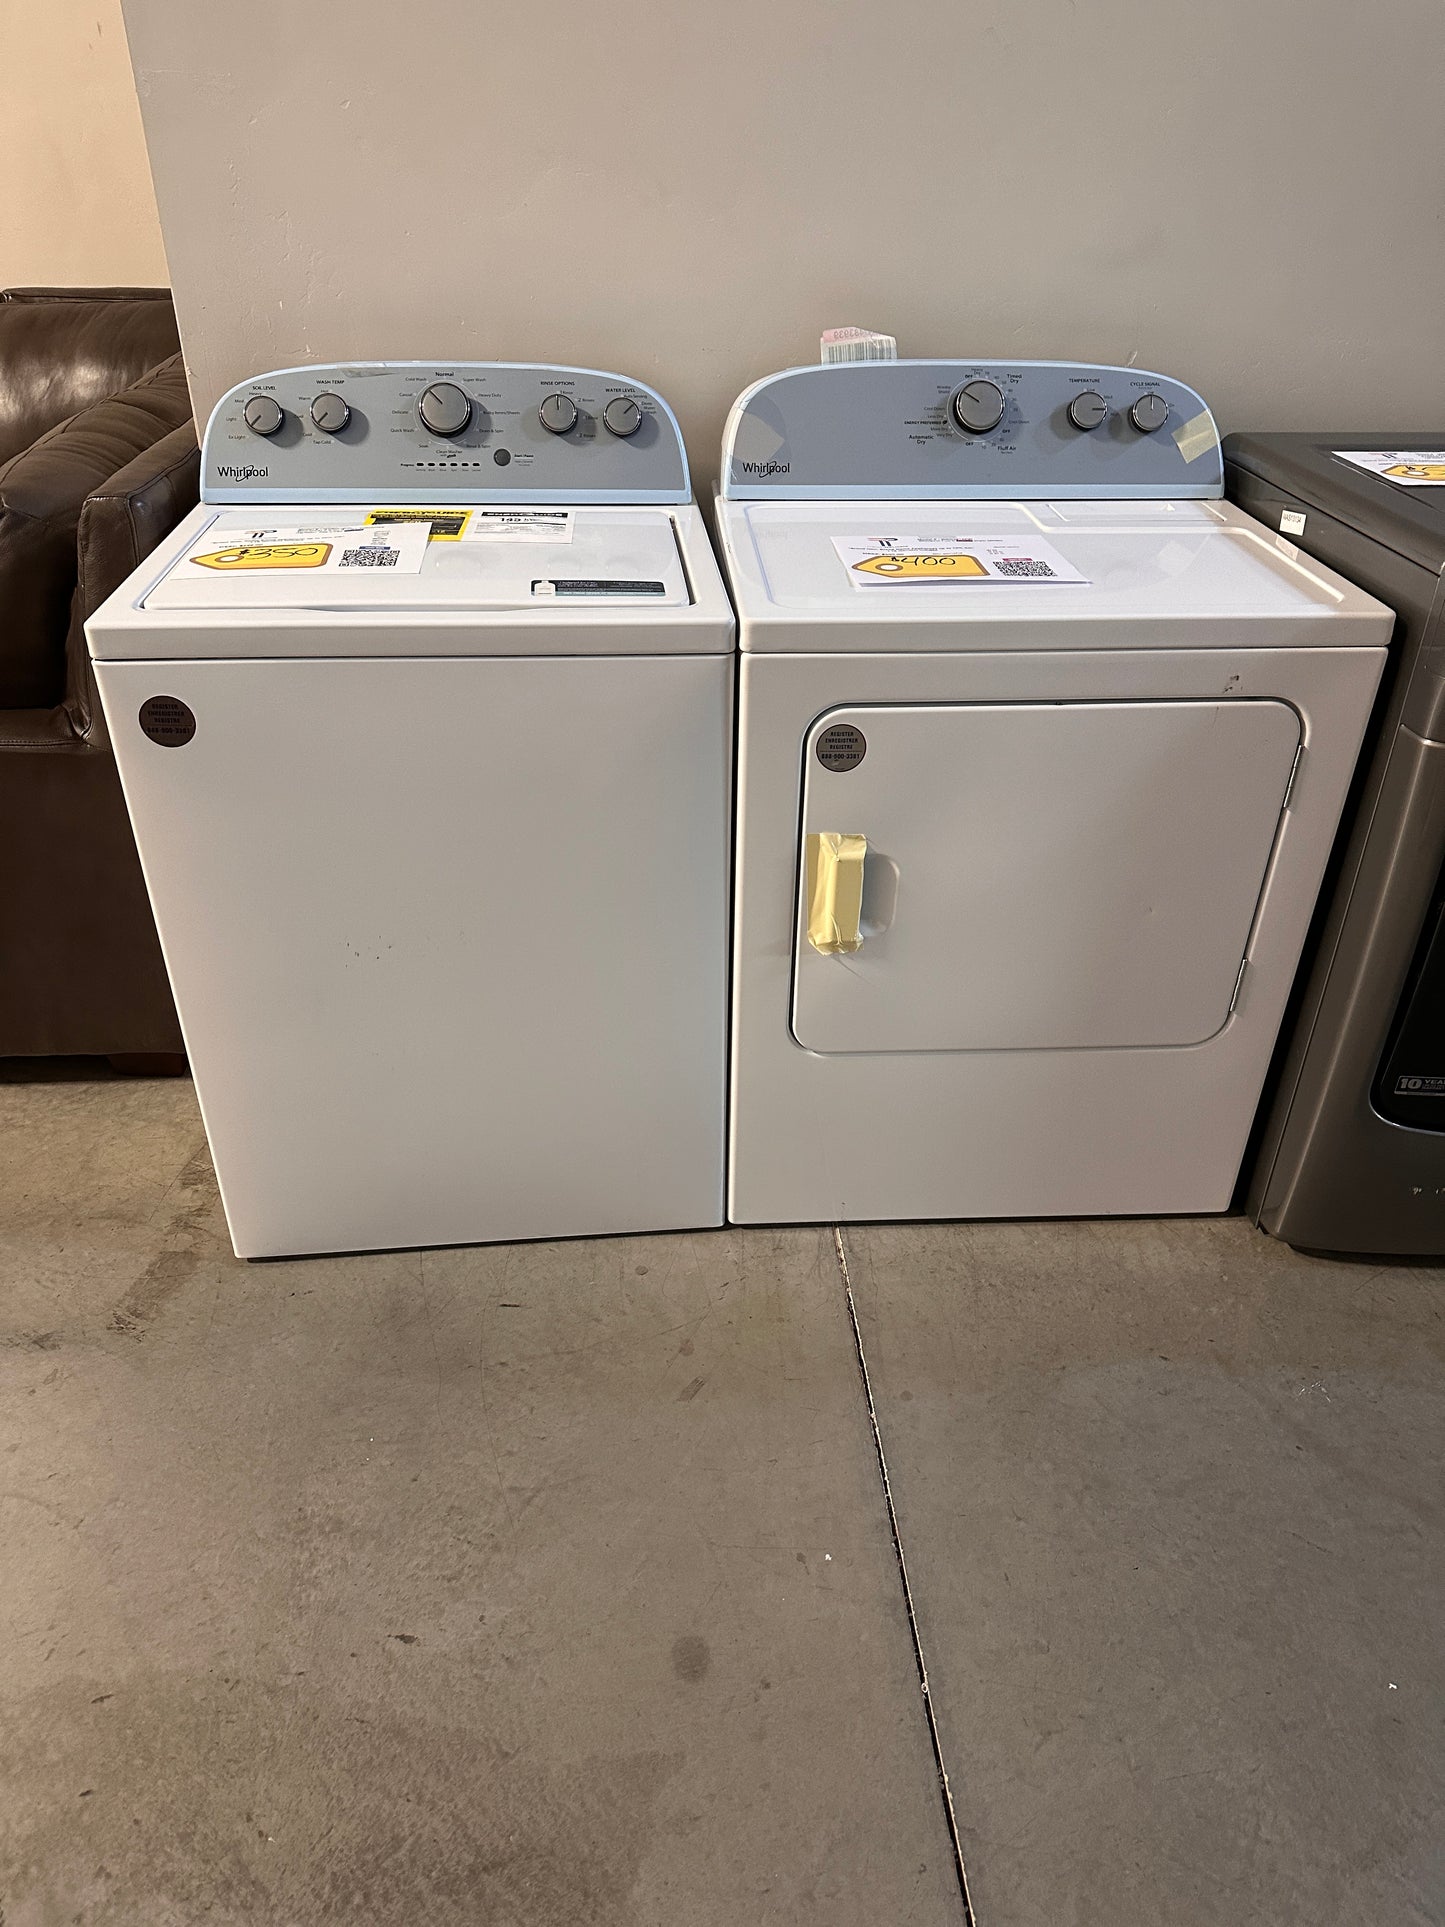 GREAT NEW WHIRLPOOL TOP LOAD WASHER ELECTRIC DRYER SET - WAS13128 DRY12418